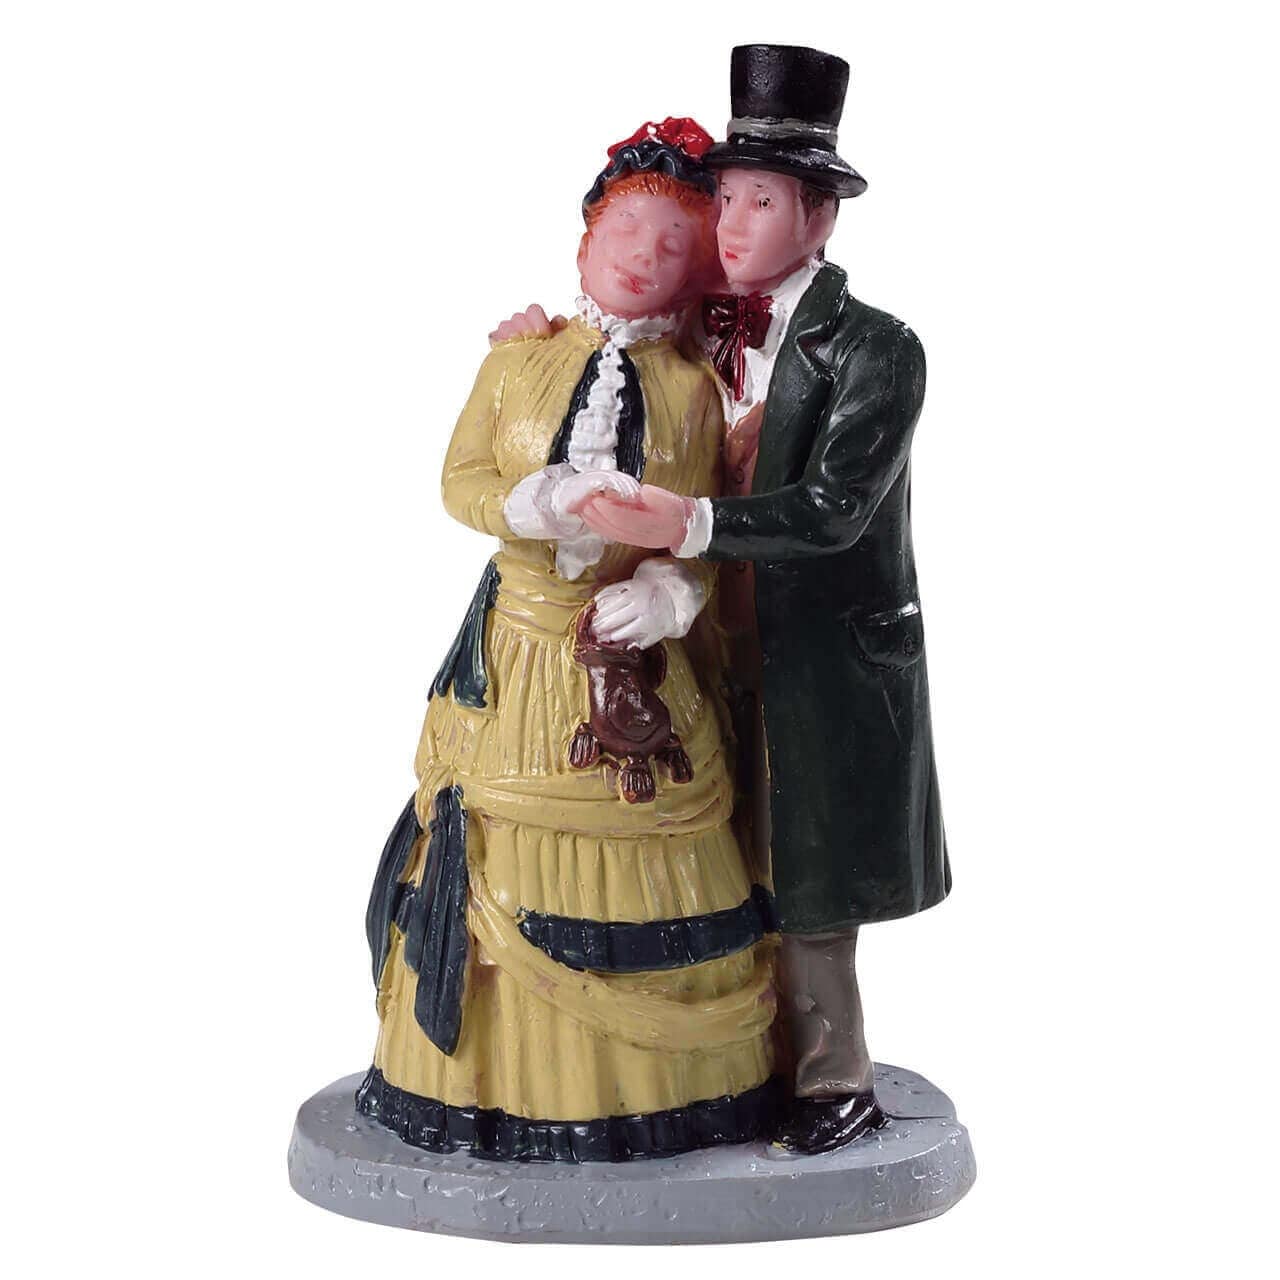 Lemax Figurines Lemax Dickens Couple